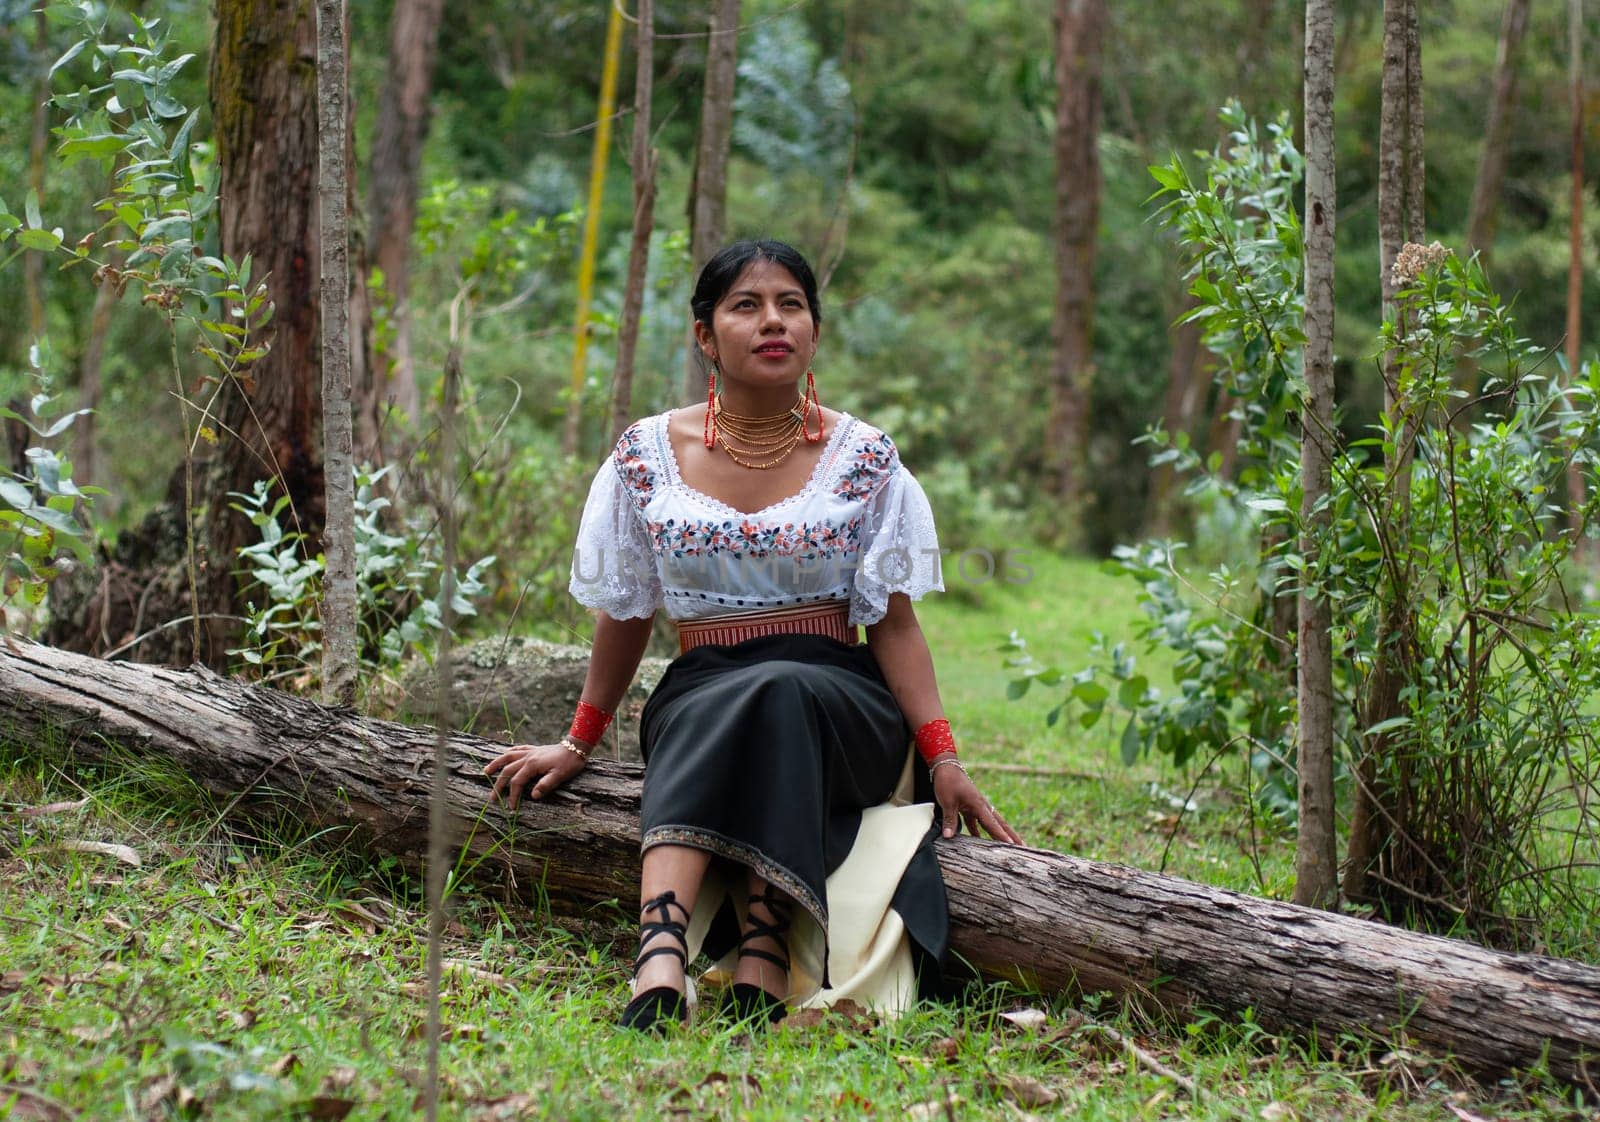 beautiful young woman from otavalo, ecuador resting in a forest on a tree trunk. indigenous woman with traditional dress, woman enjoying the harmony and peace of nature. earth day. by Raulmartin